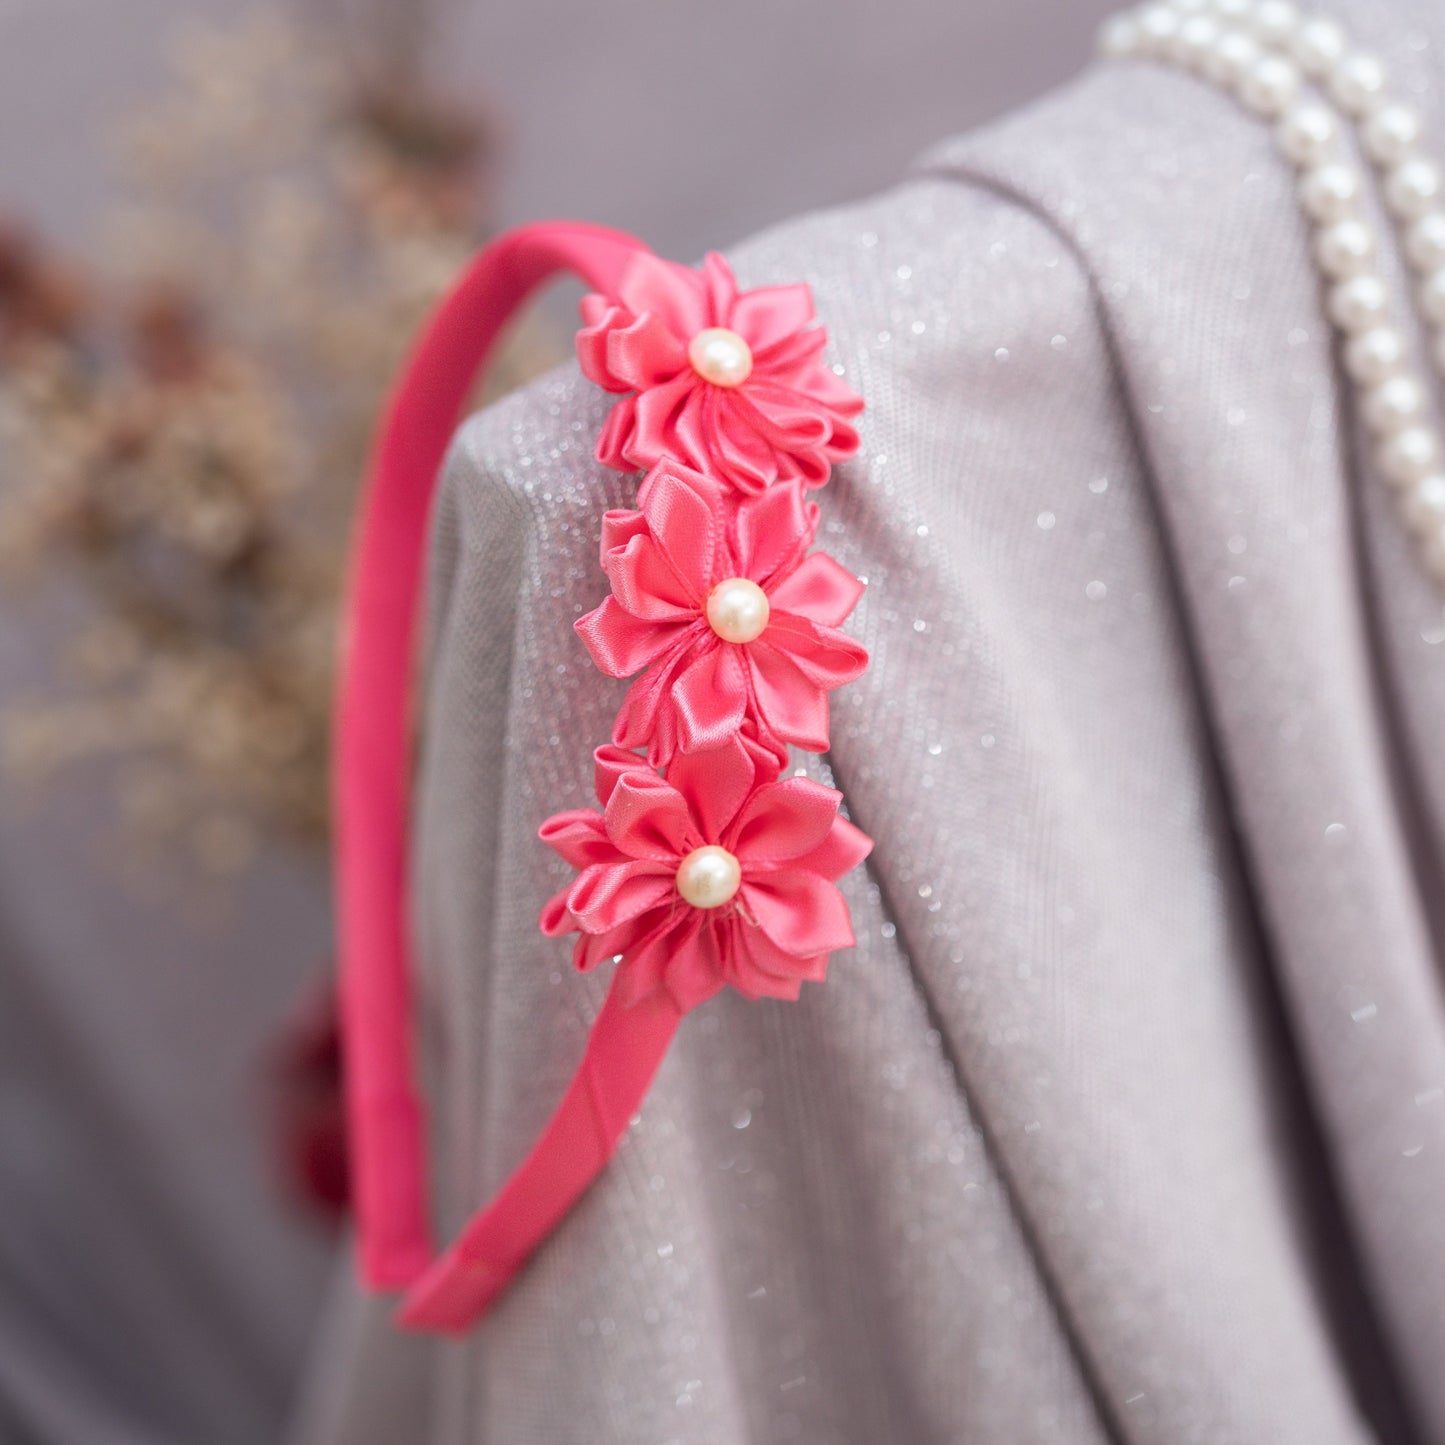 Ribbon Candy - Triple Satin Flower Hairband with Pearl Detailing- Pink